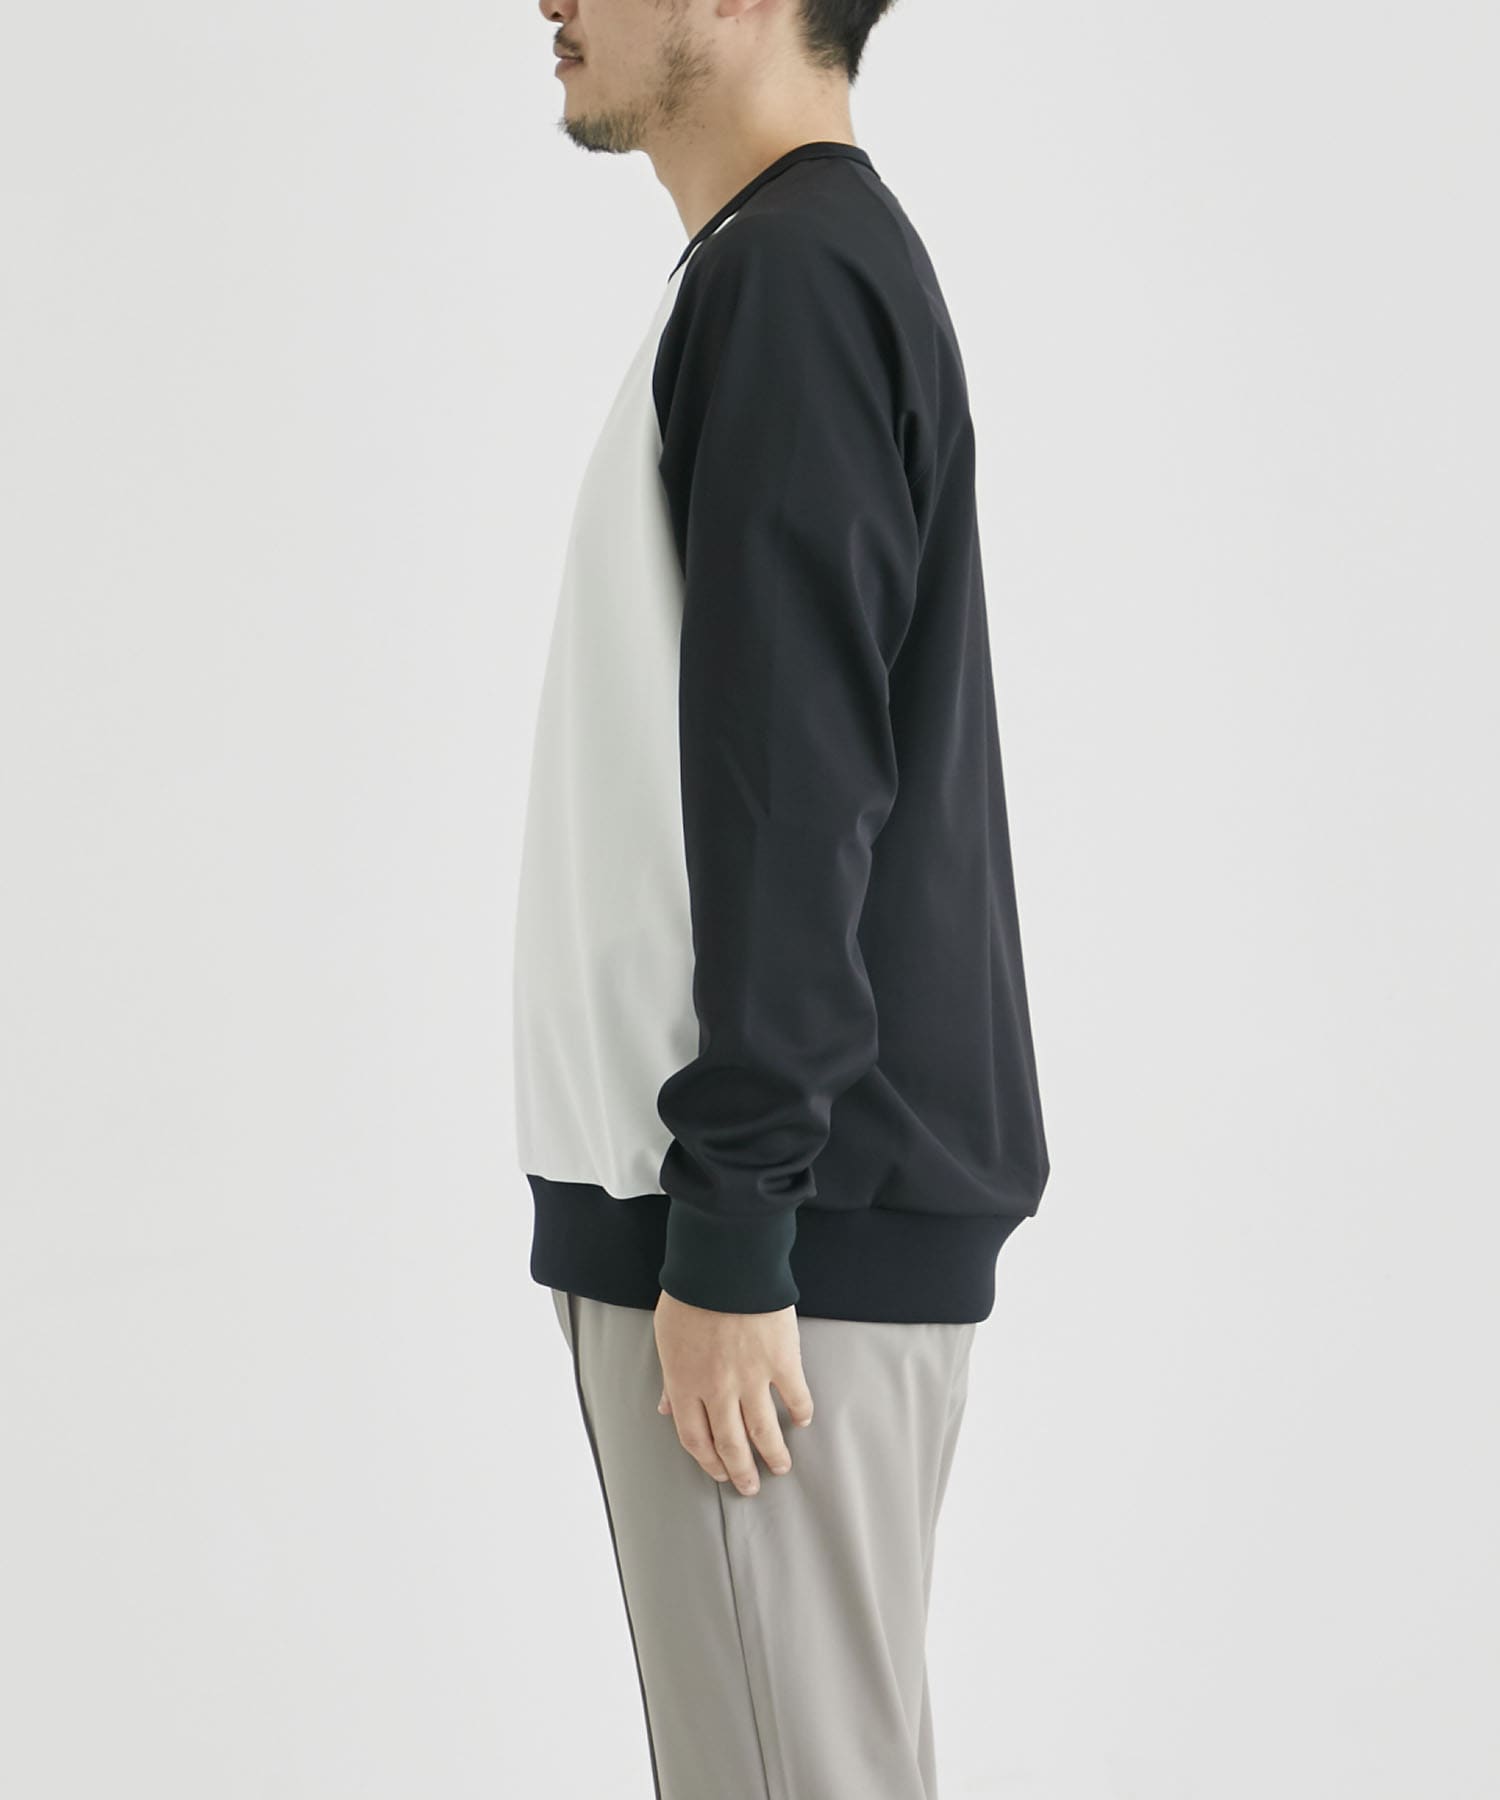 Washable High Function Jersey Raglan L/S Tops THE PERMANENT EYE